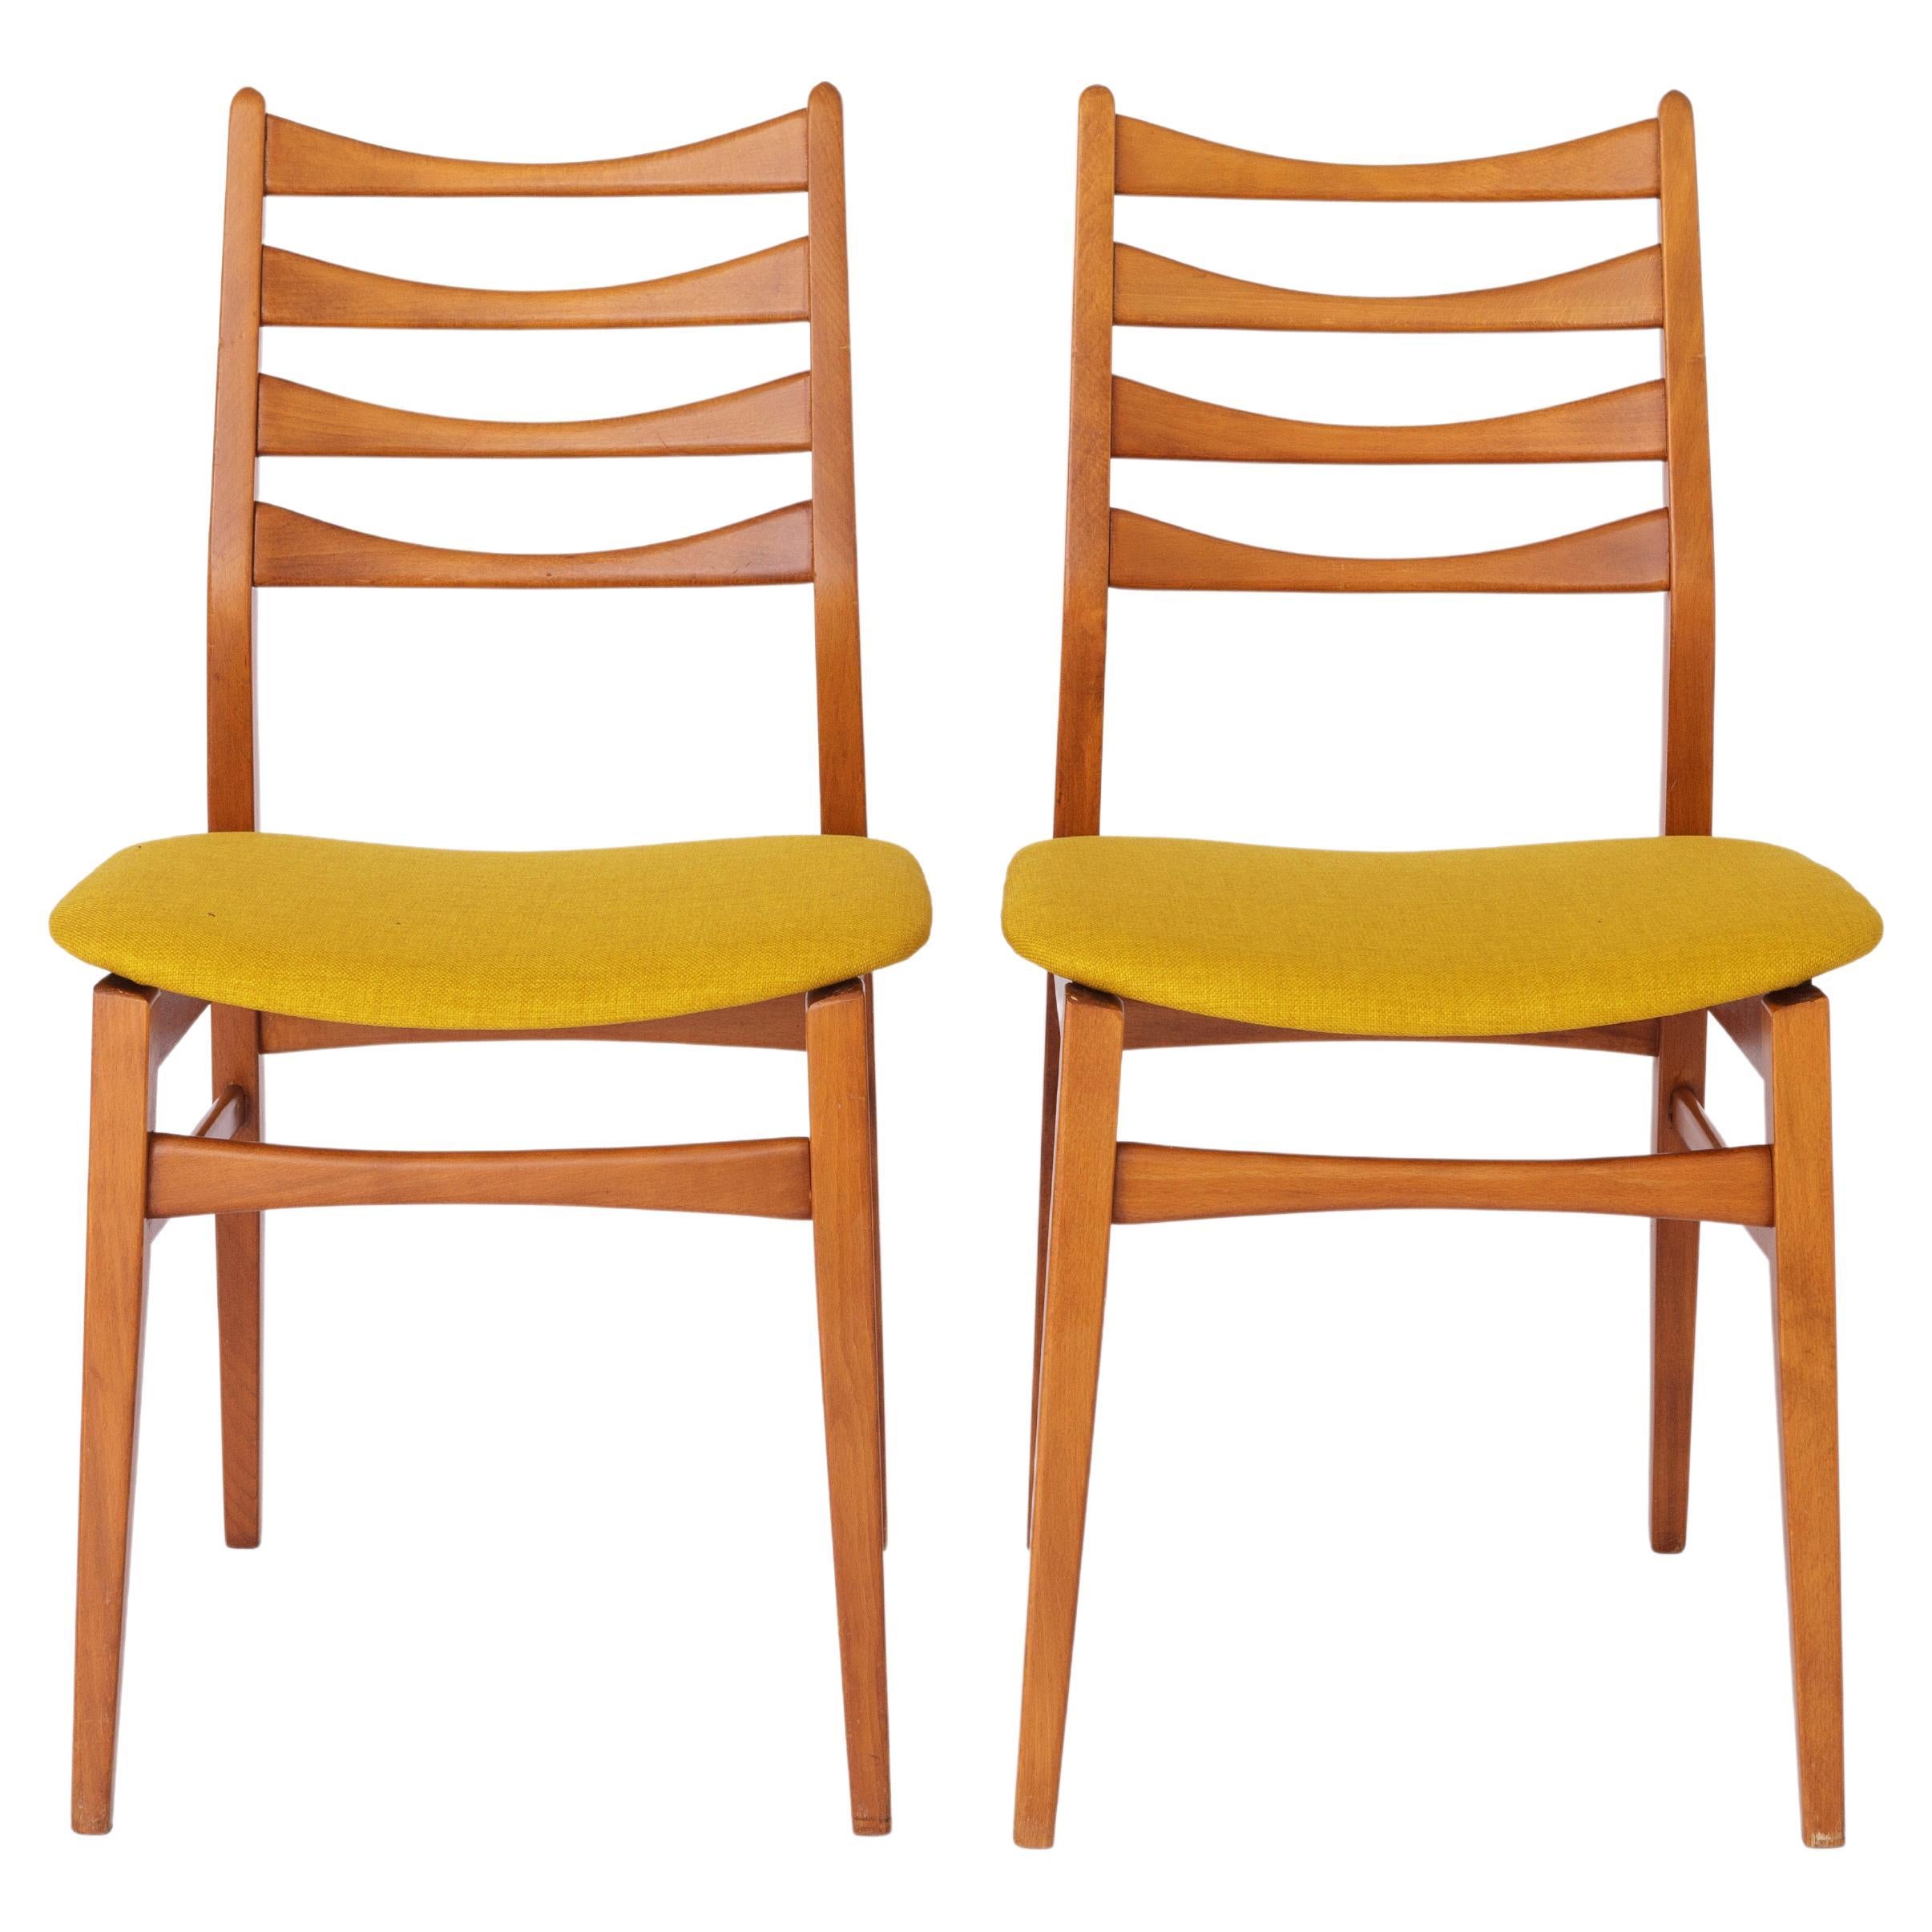 2 of 4 Vintage Chairs 1960s-1970s Germany